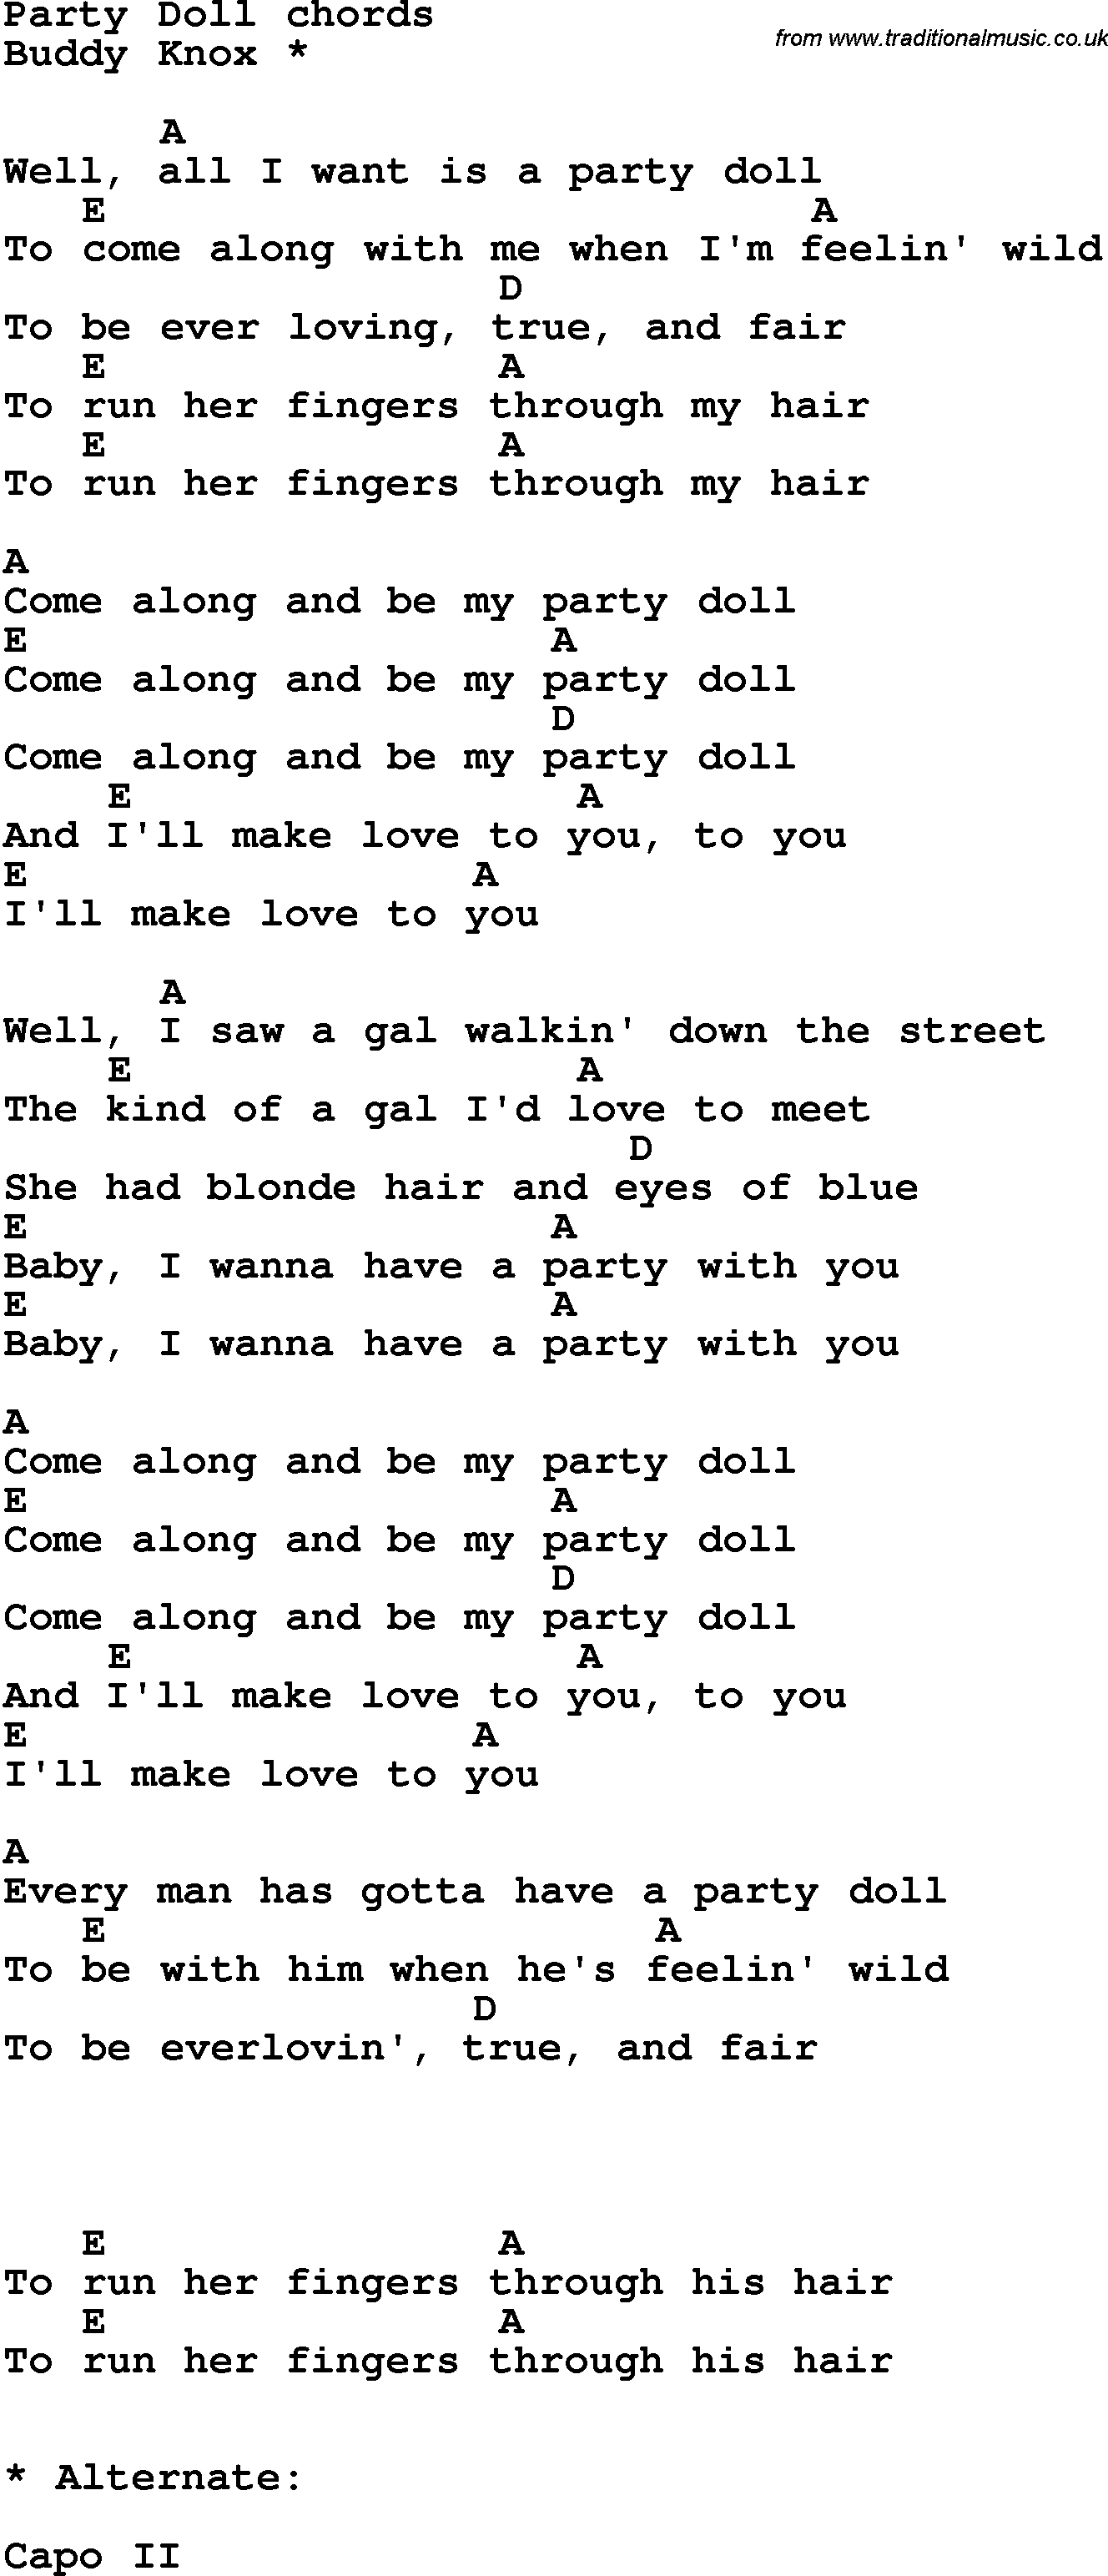 Song Lyrics with guitar chords for Party Doll